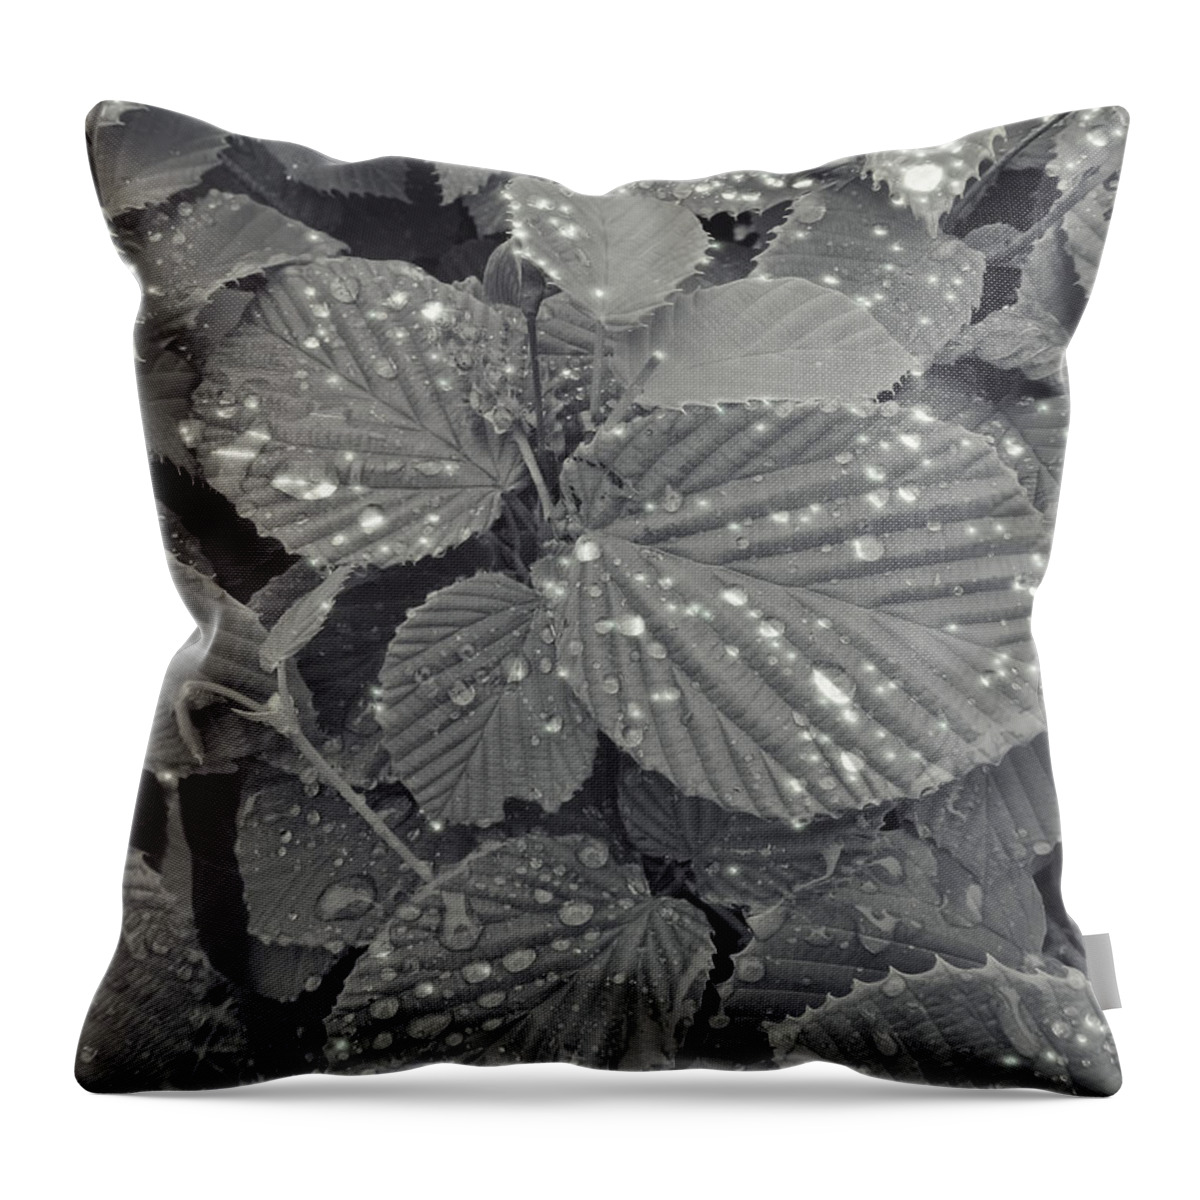 Leaves Throw Pillow featuring the photograph Sparkling Leaves by Cathy Anderson